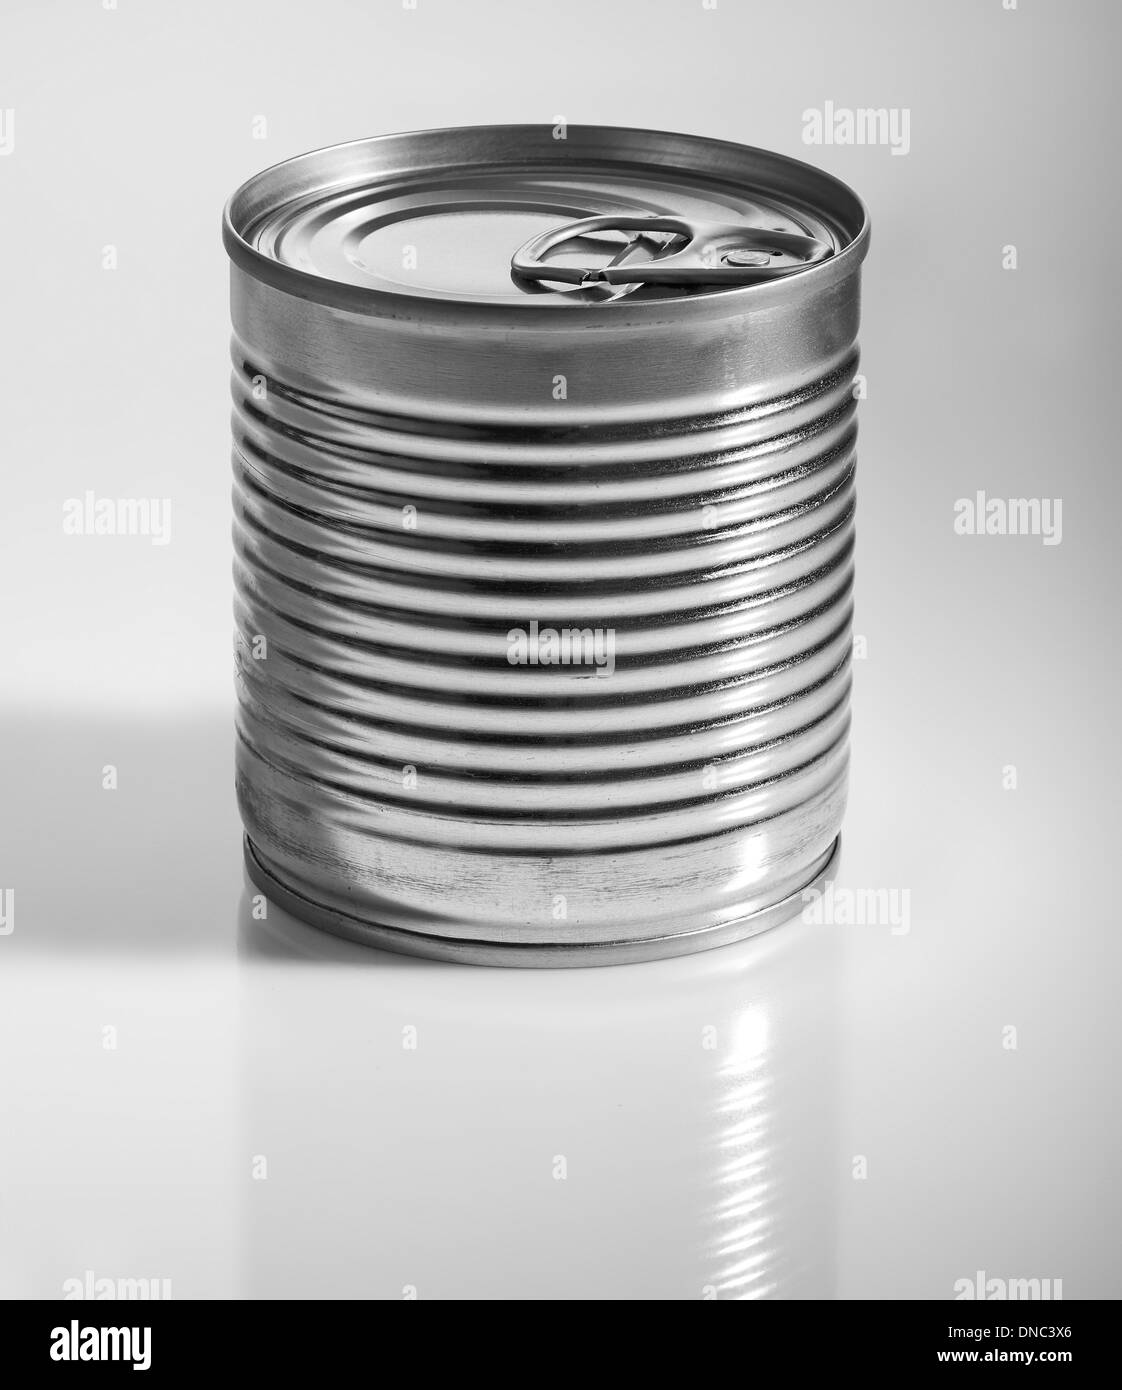 A silver tin can on a grey background. Stock Photo